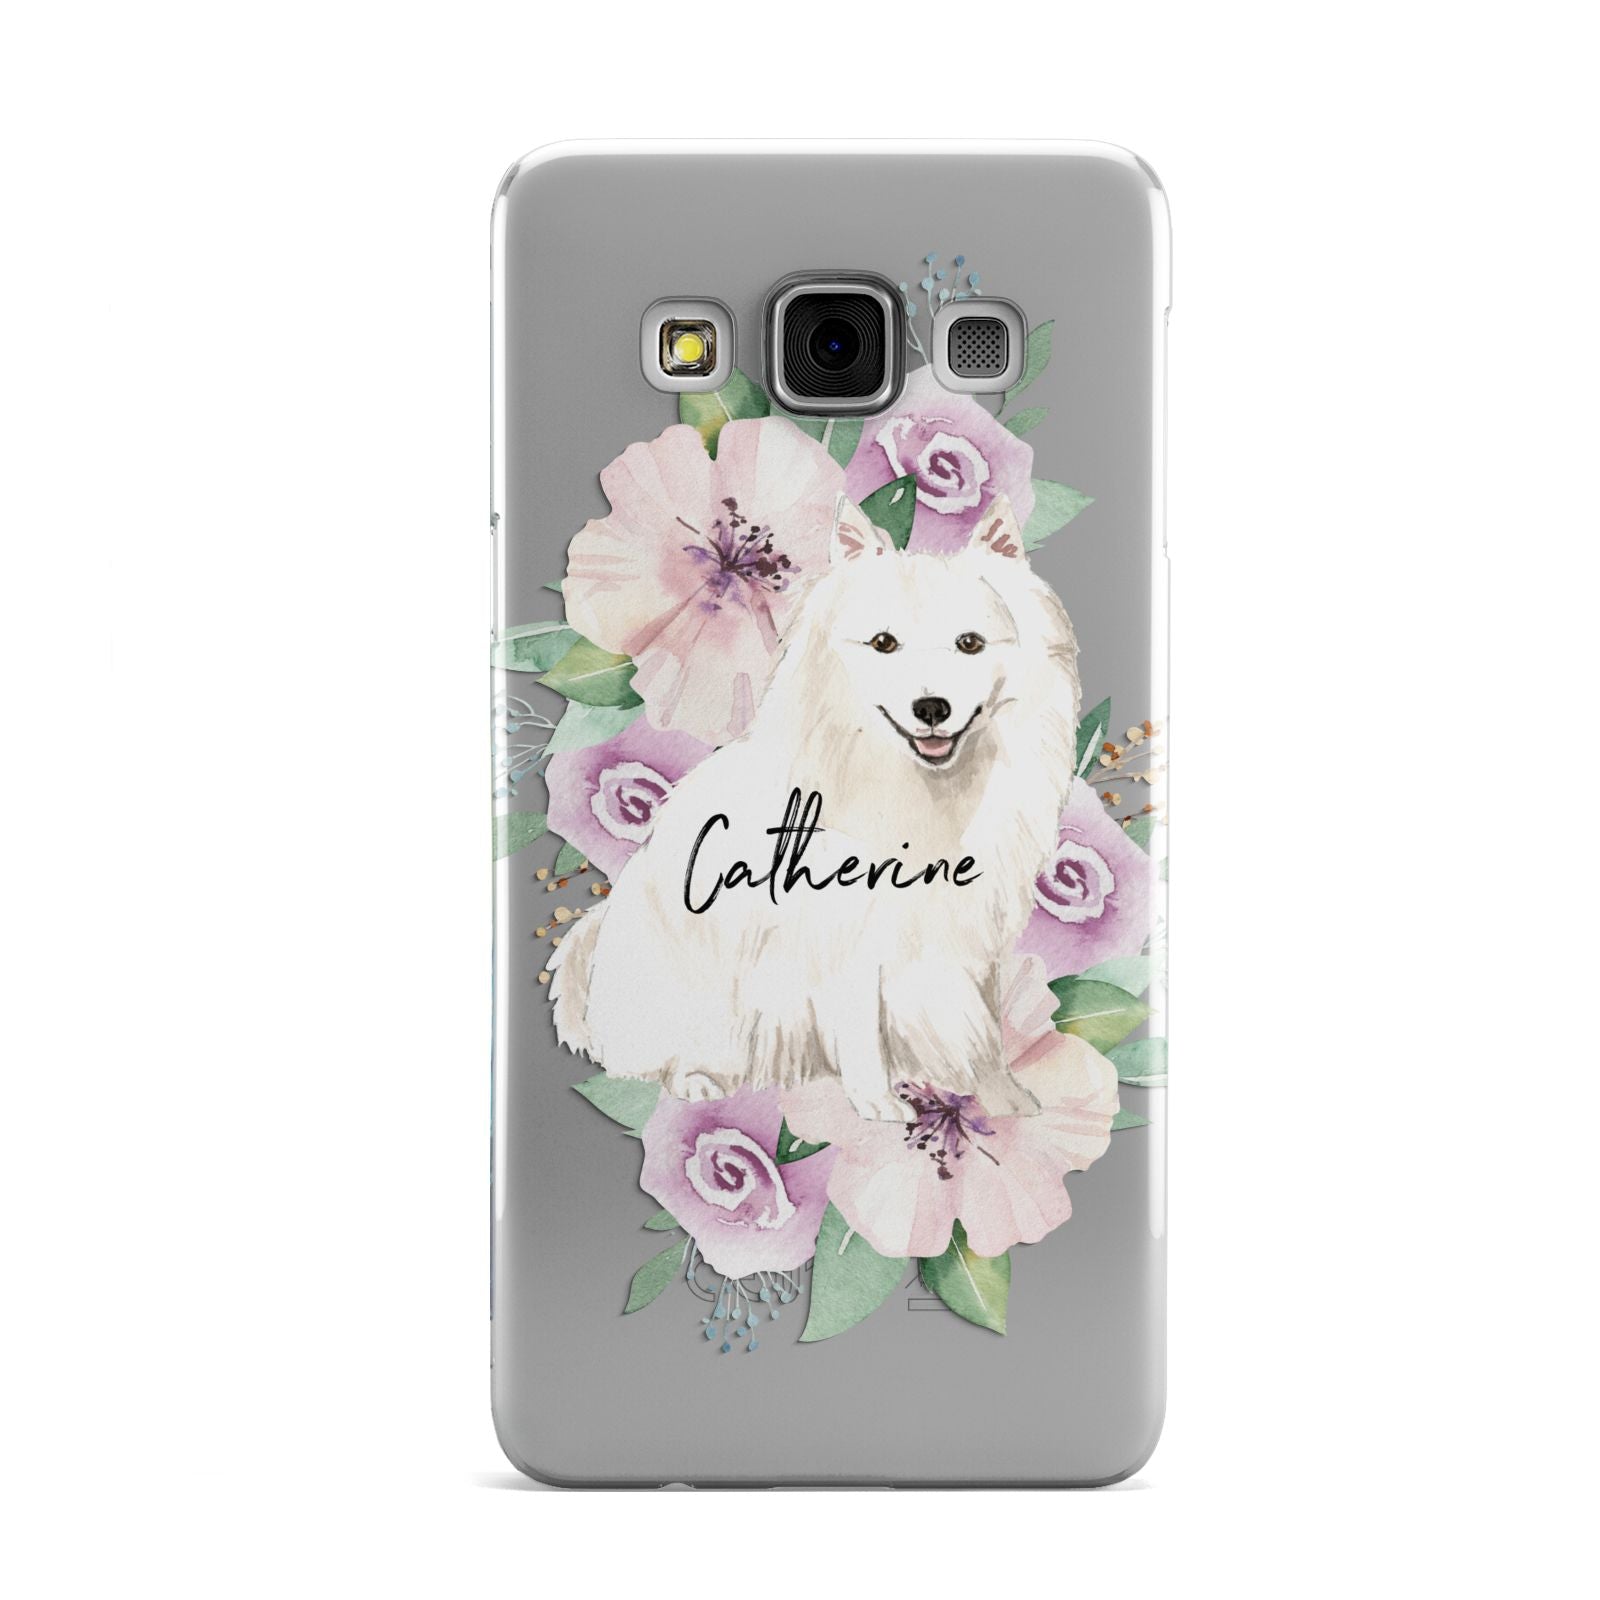 Personalised Japanese Spitz Samsung Galaxy A3 Case